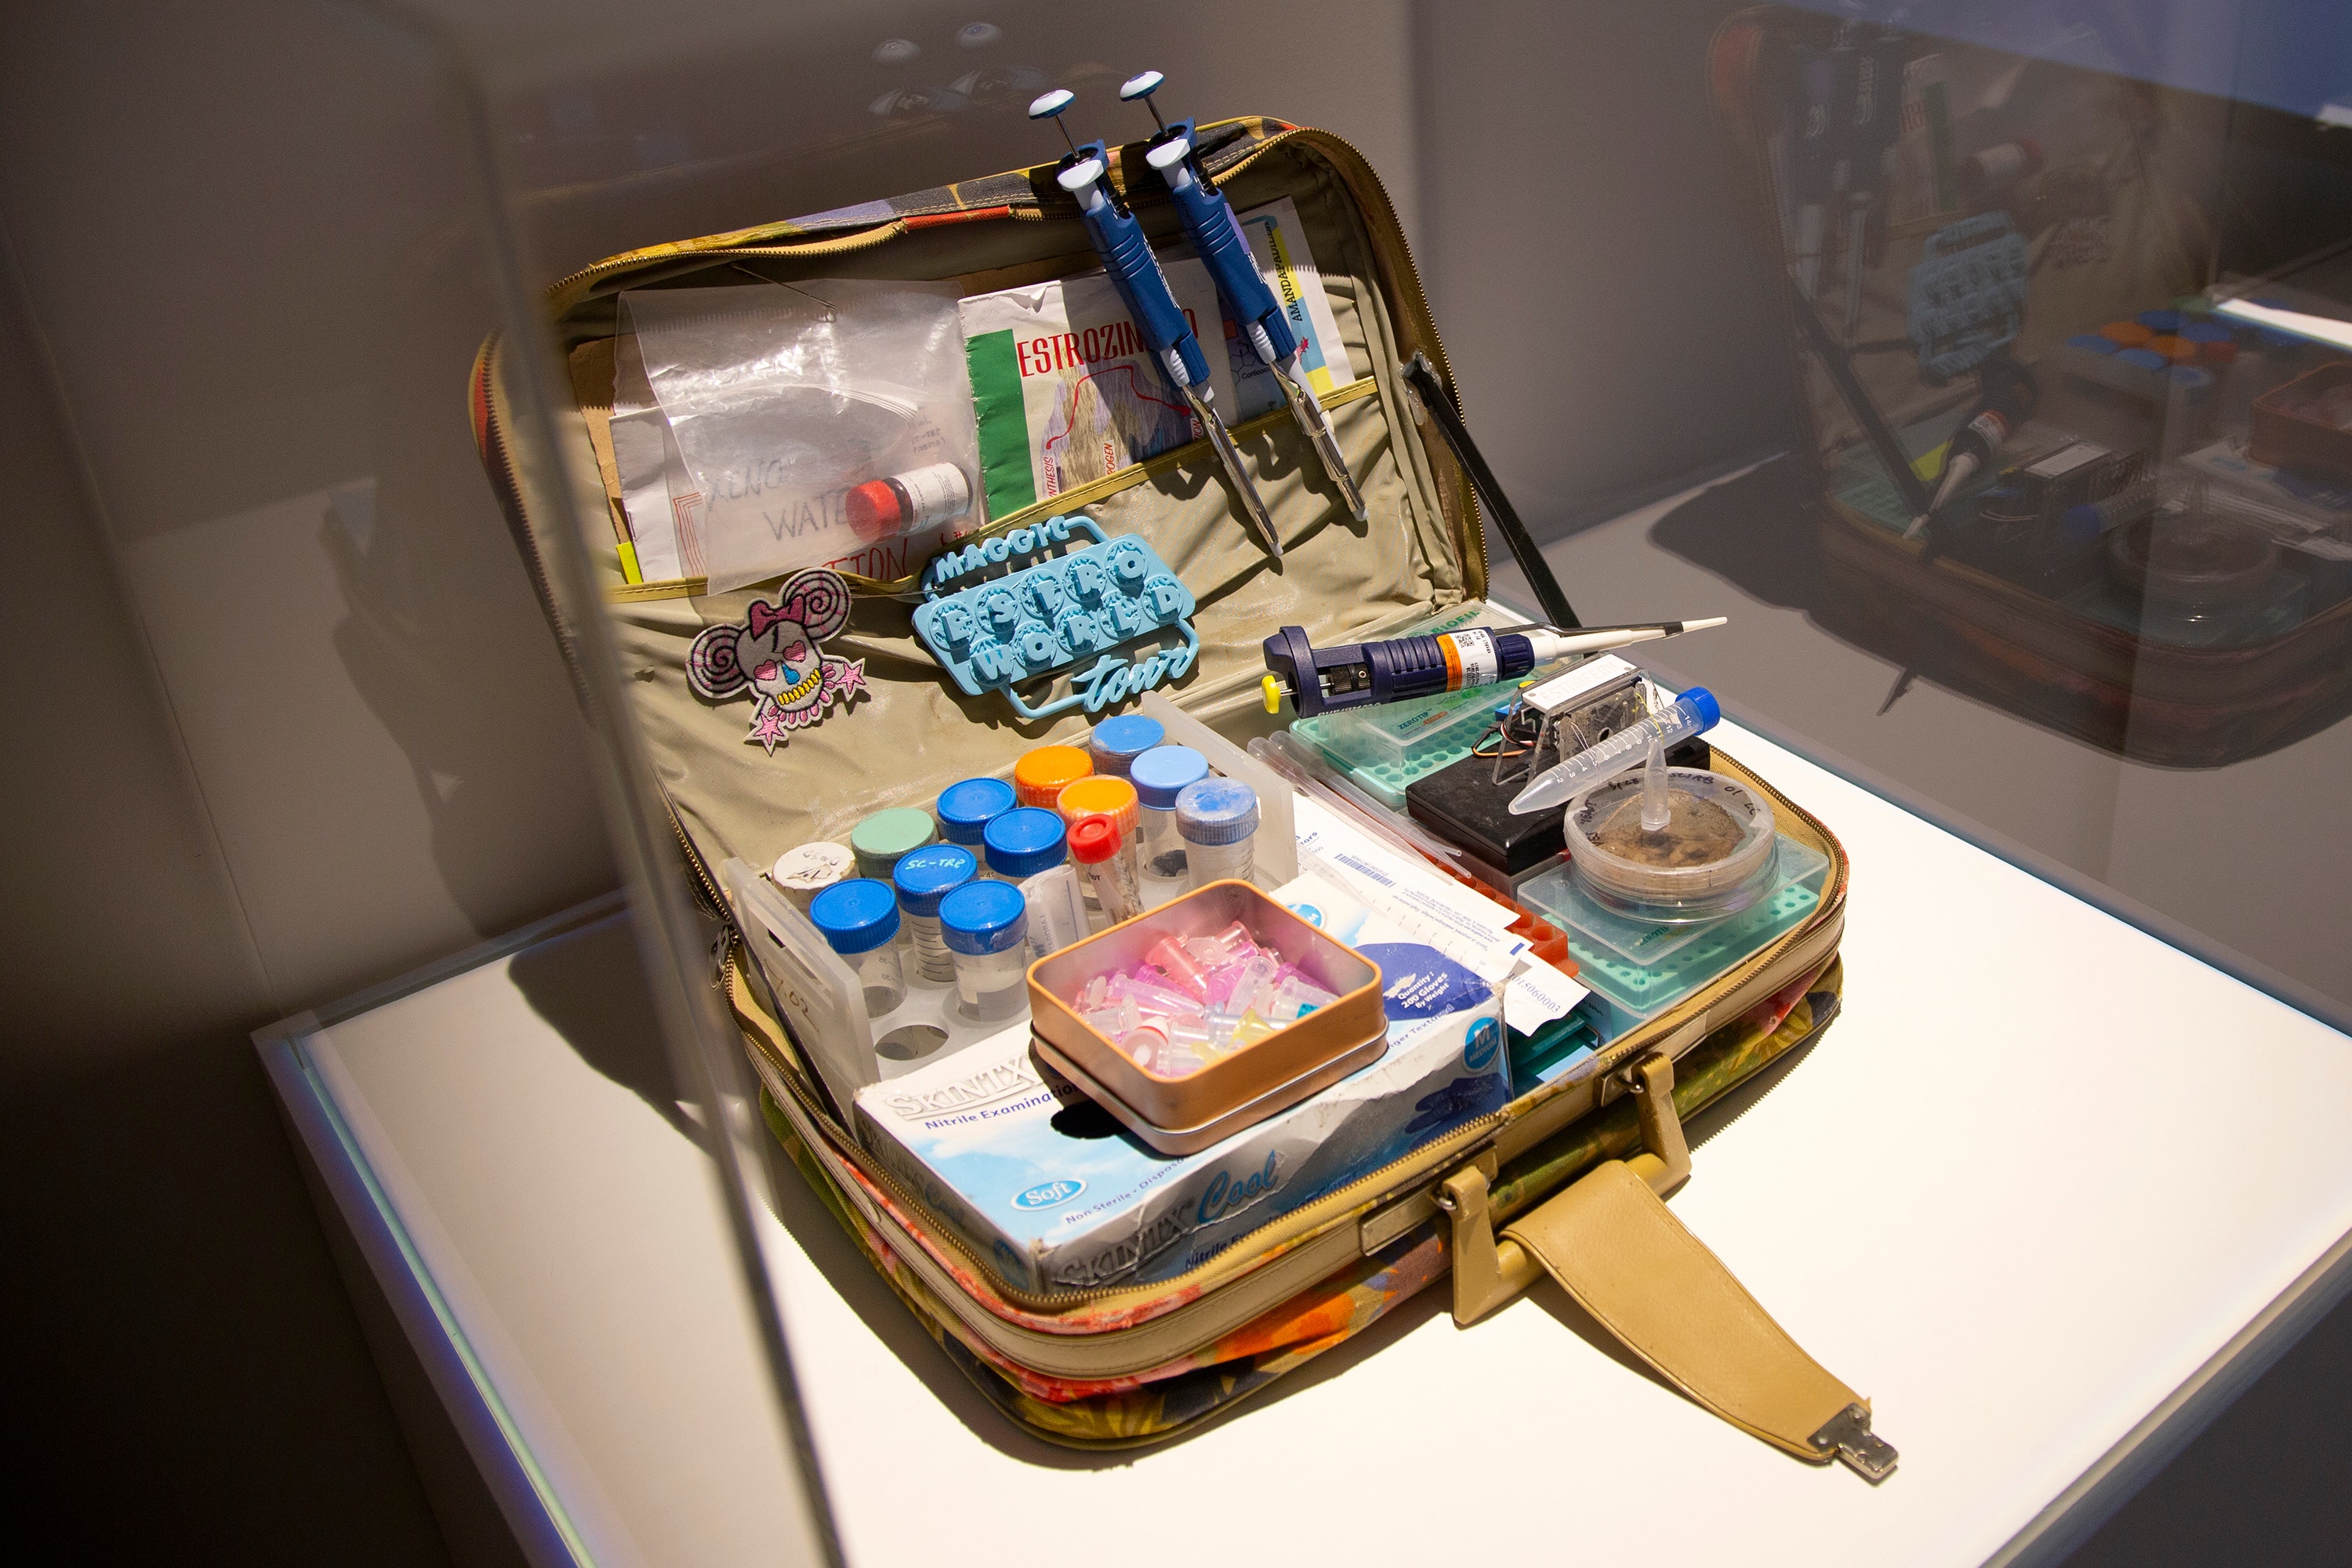 Image of artwork that takes the form of a suitcase with DIY tools inside.